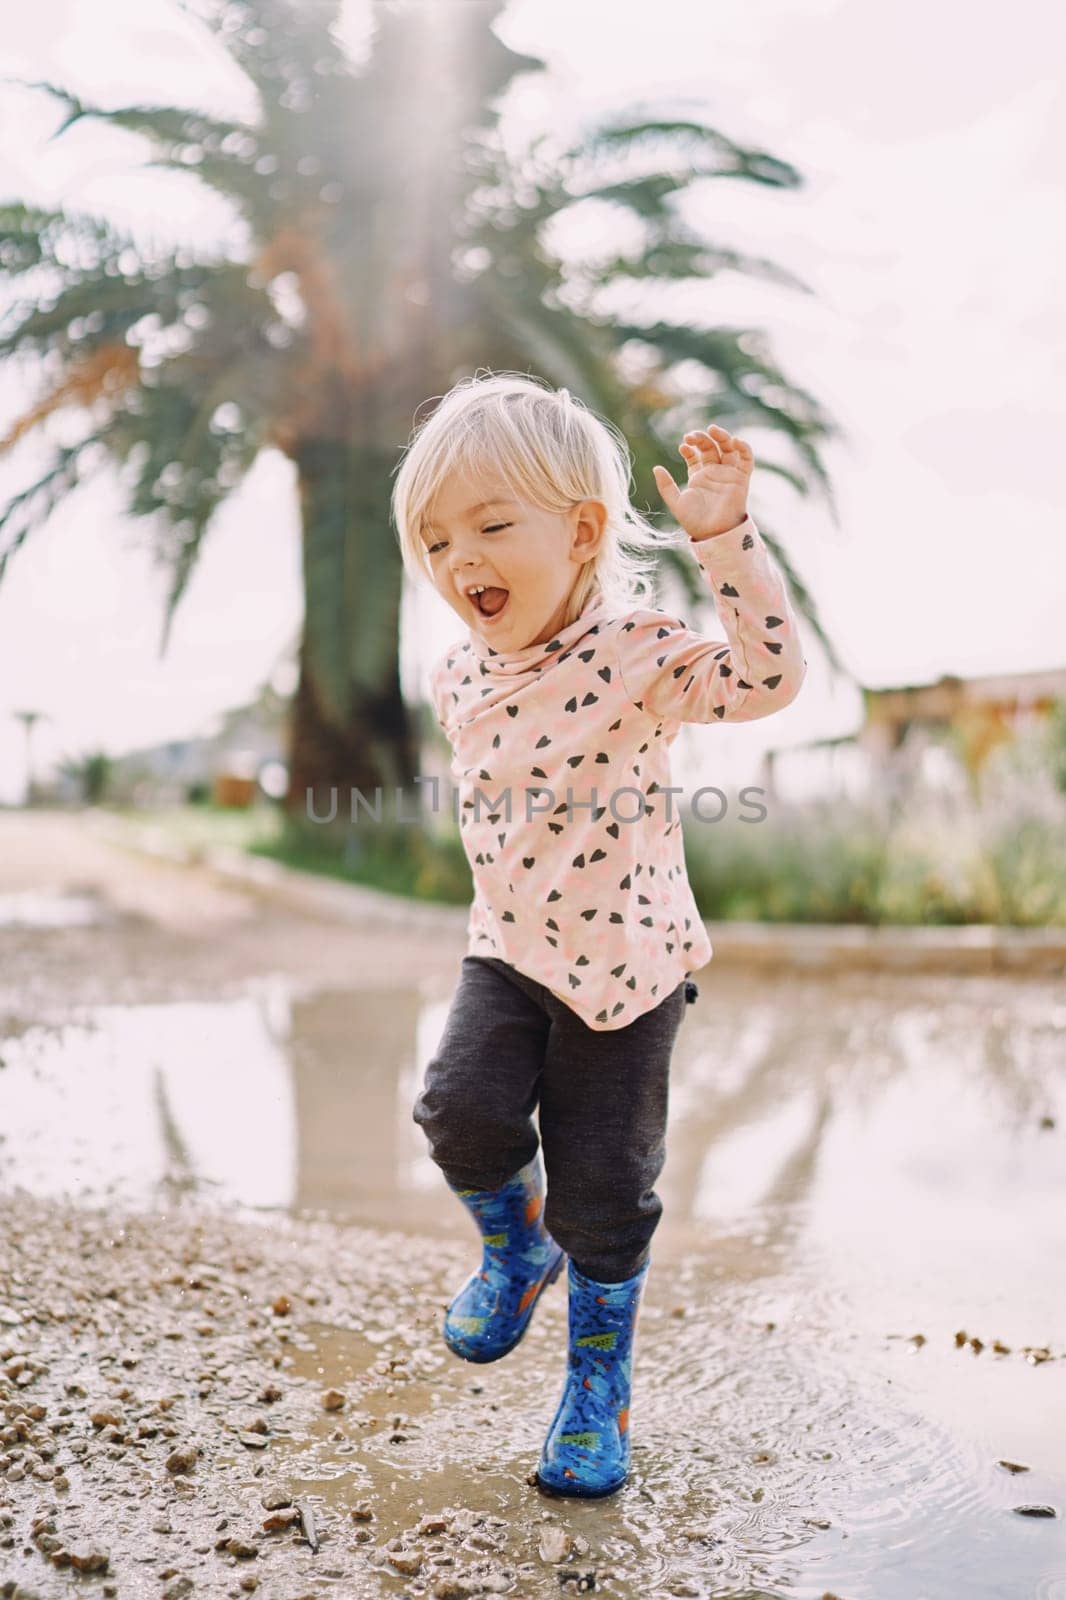 Smiling little girl in rubber boots jumping on a puddle. High quality photo